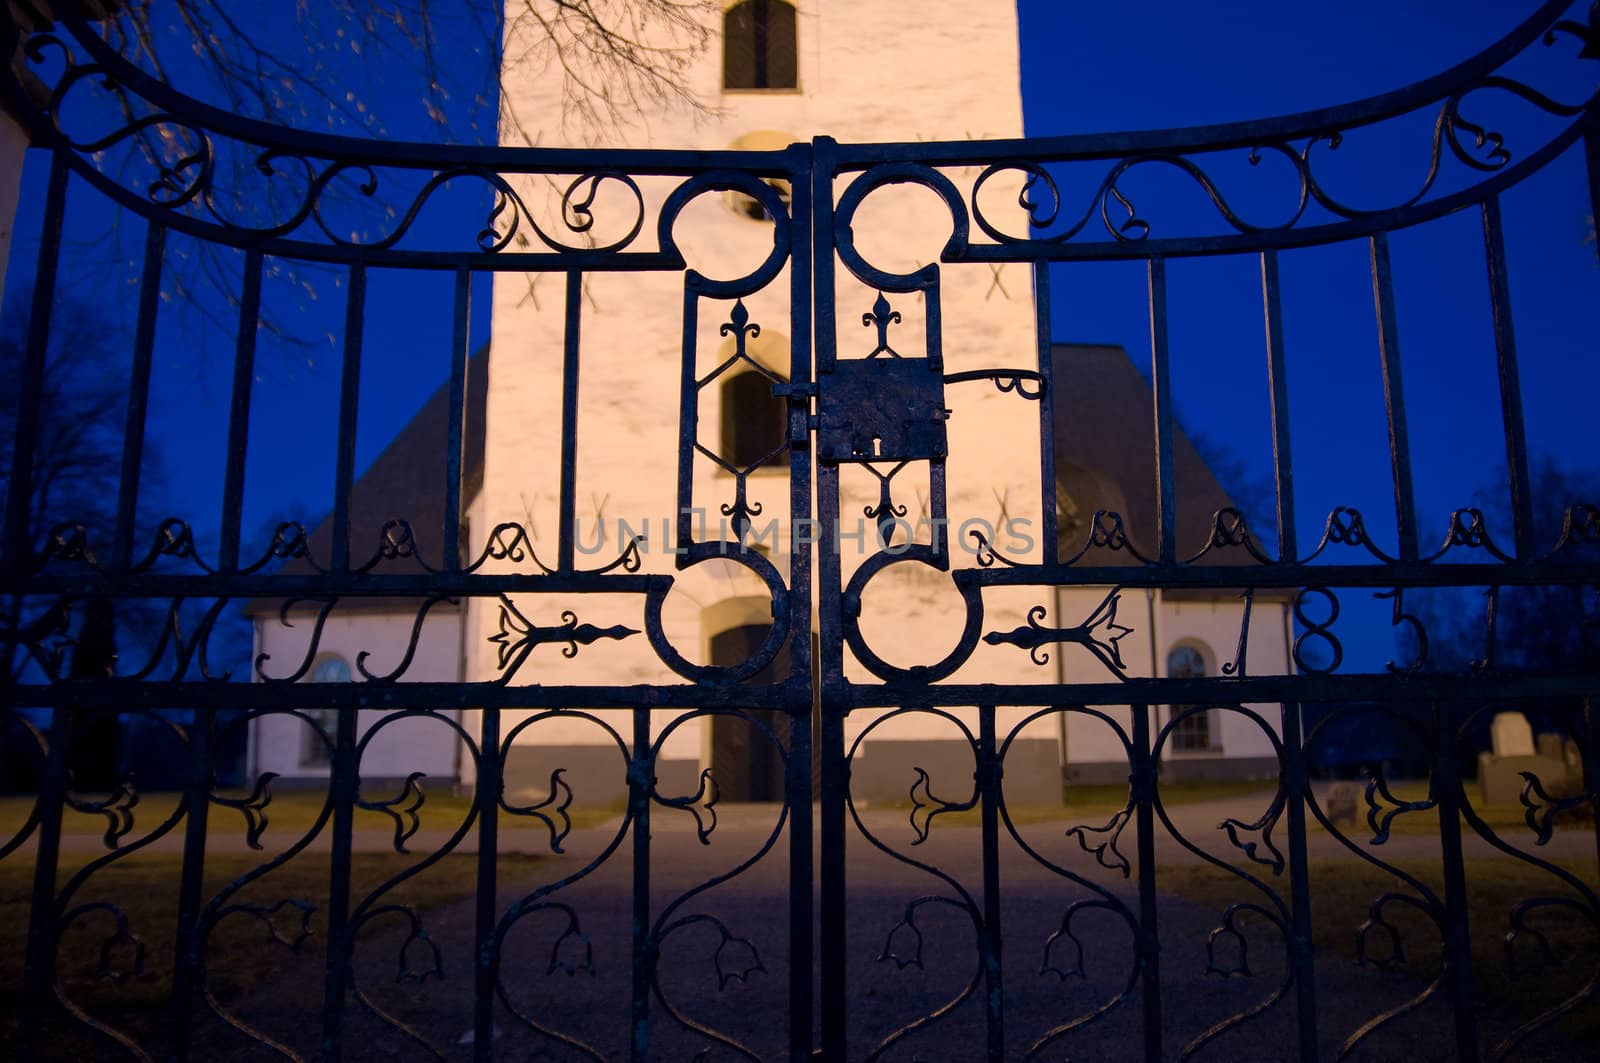 A old iron gate at a entrance to a church and graveyard